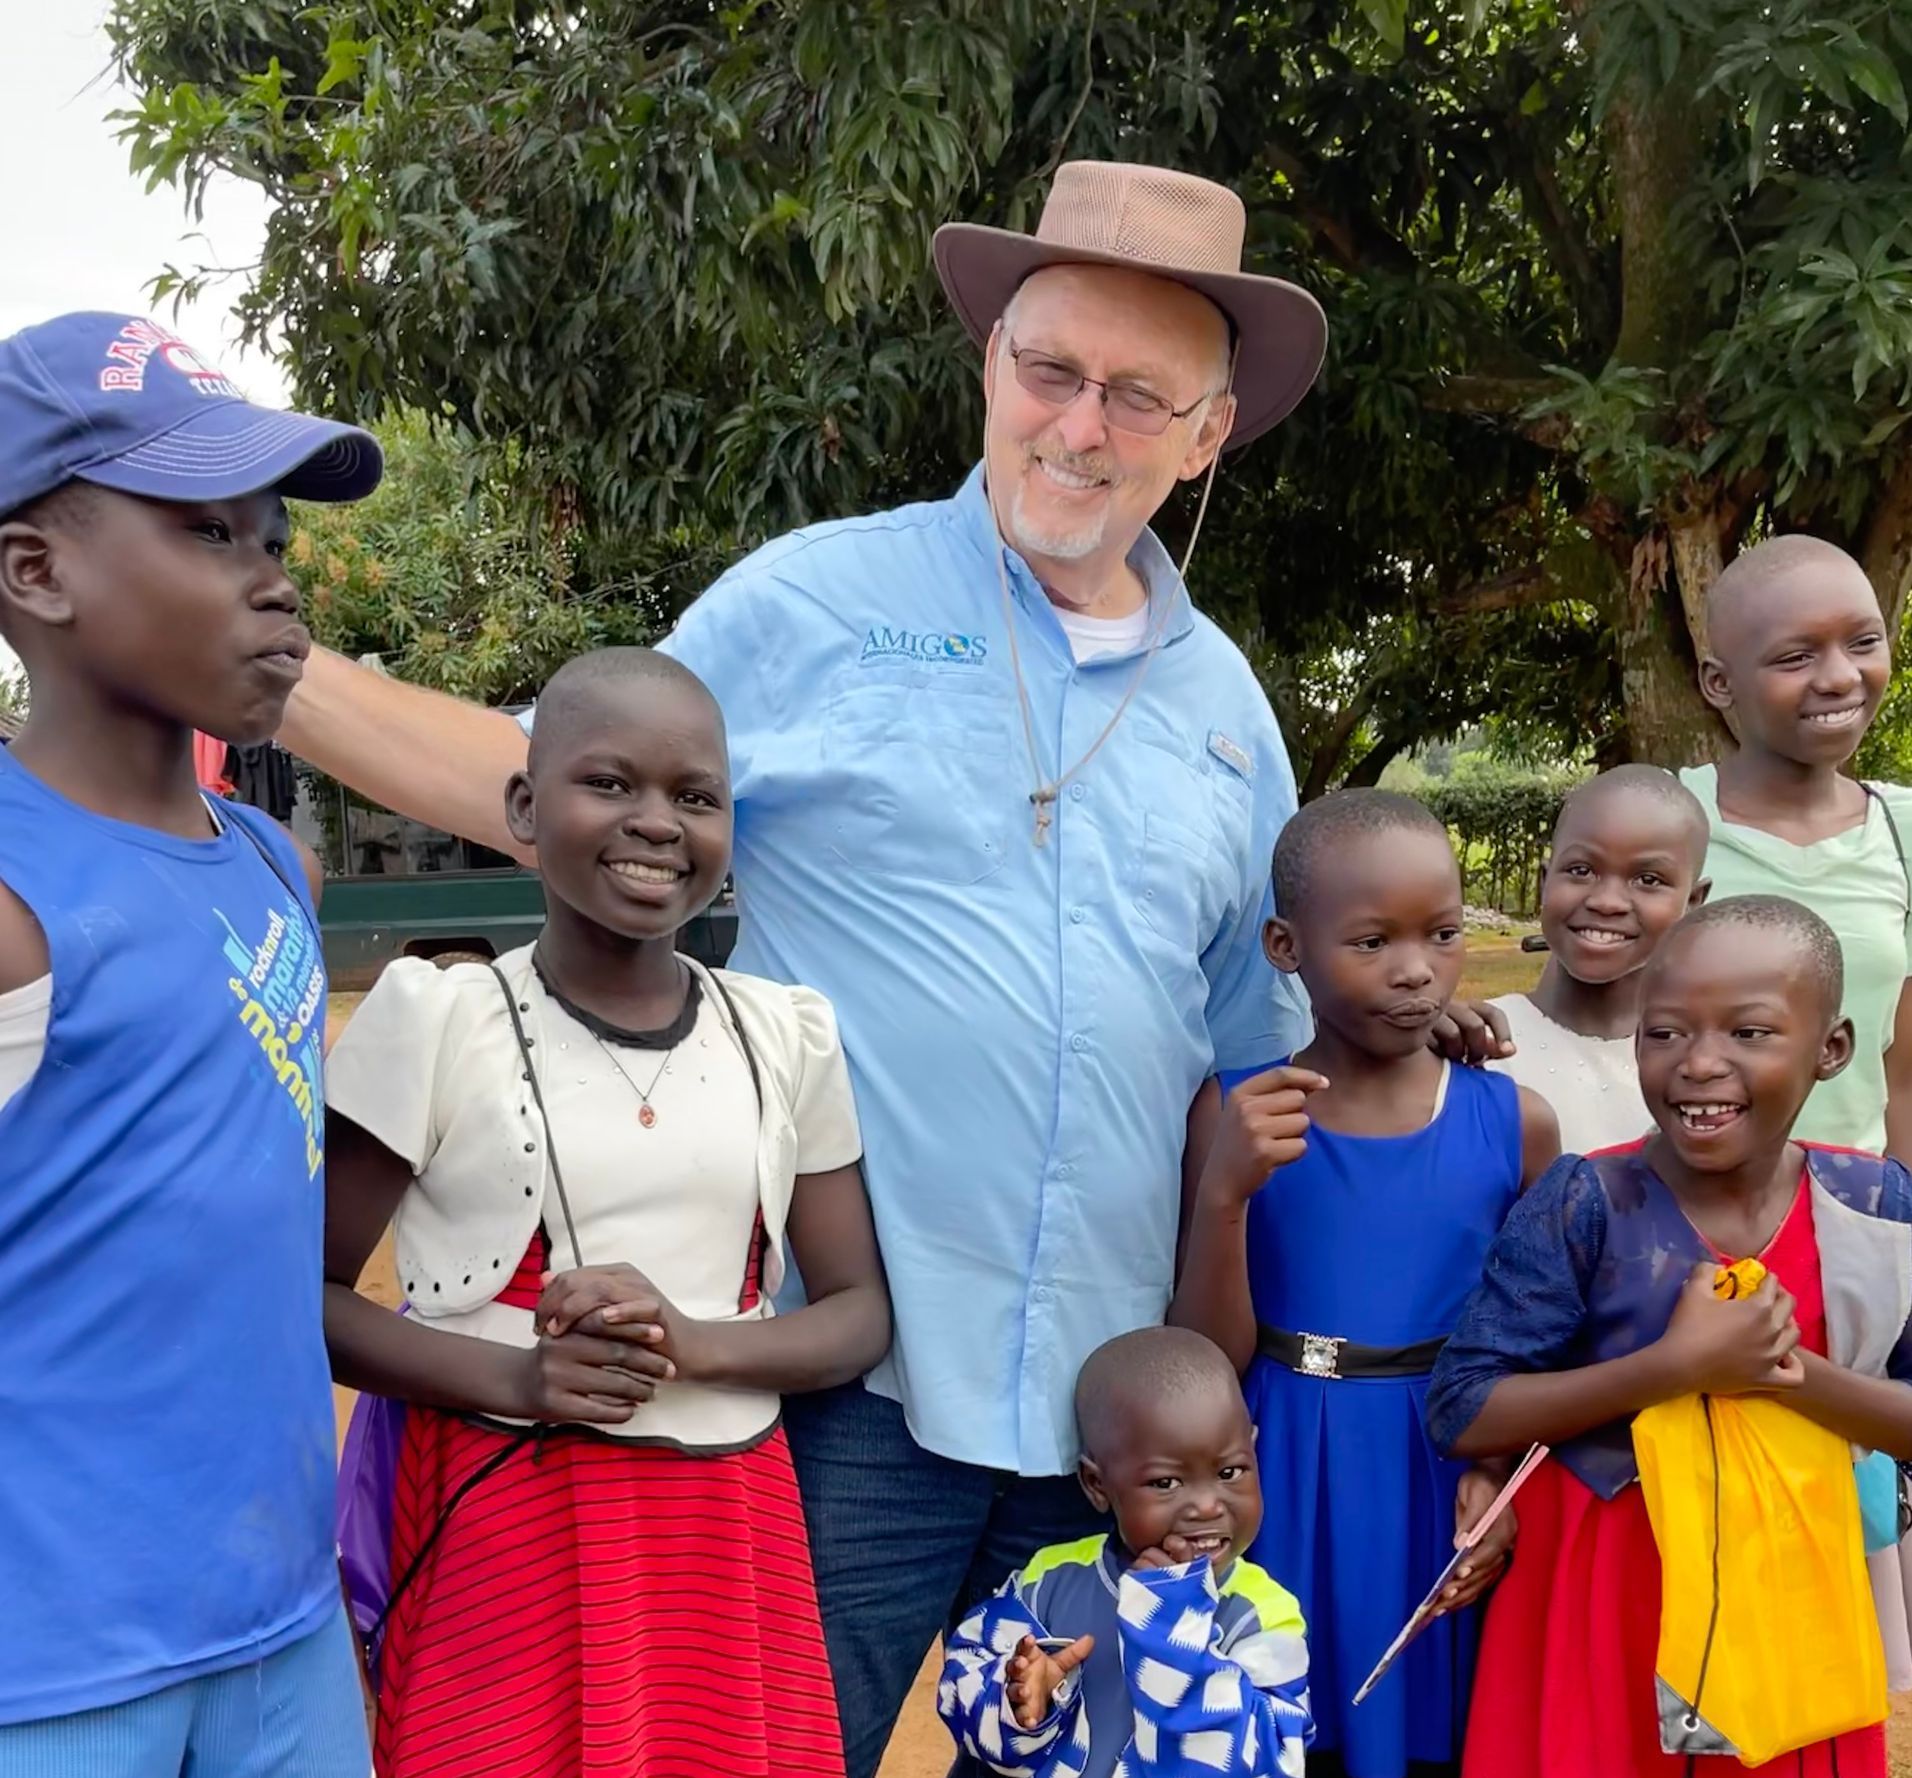 a group of children are posing for a picture with a man wearing a hat